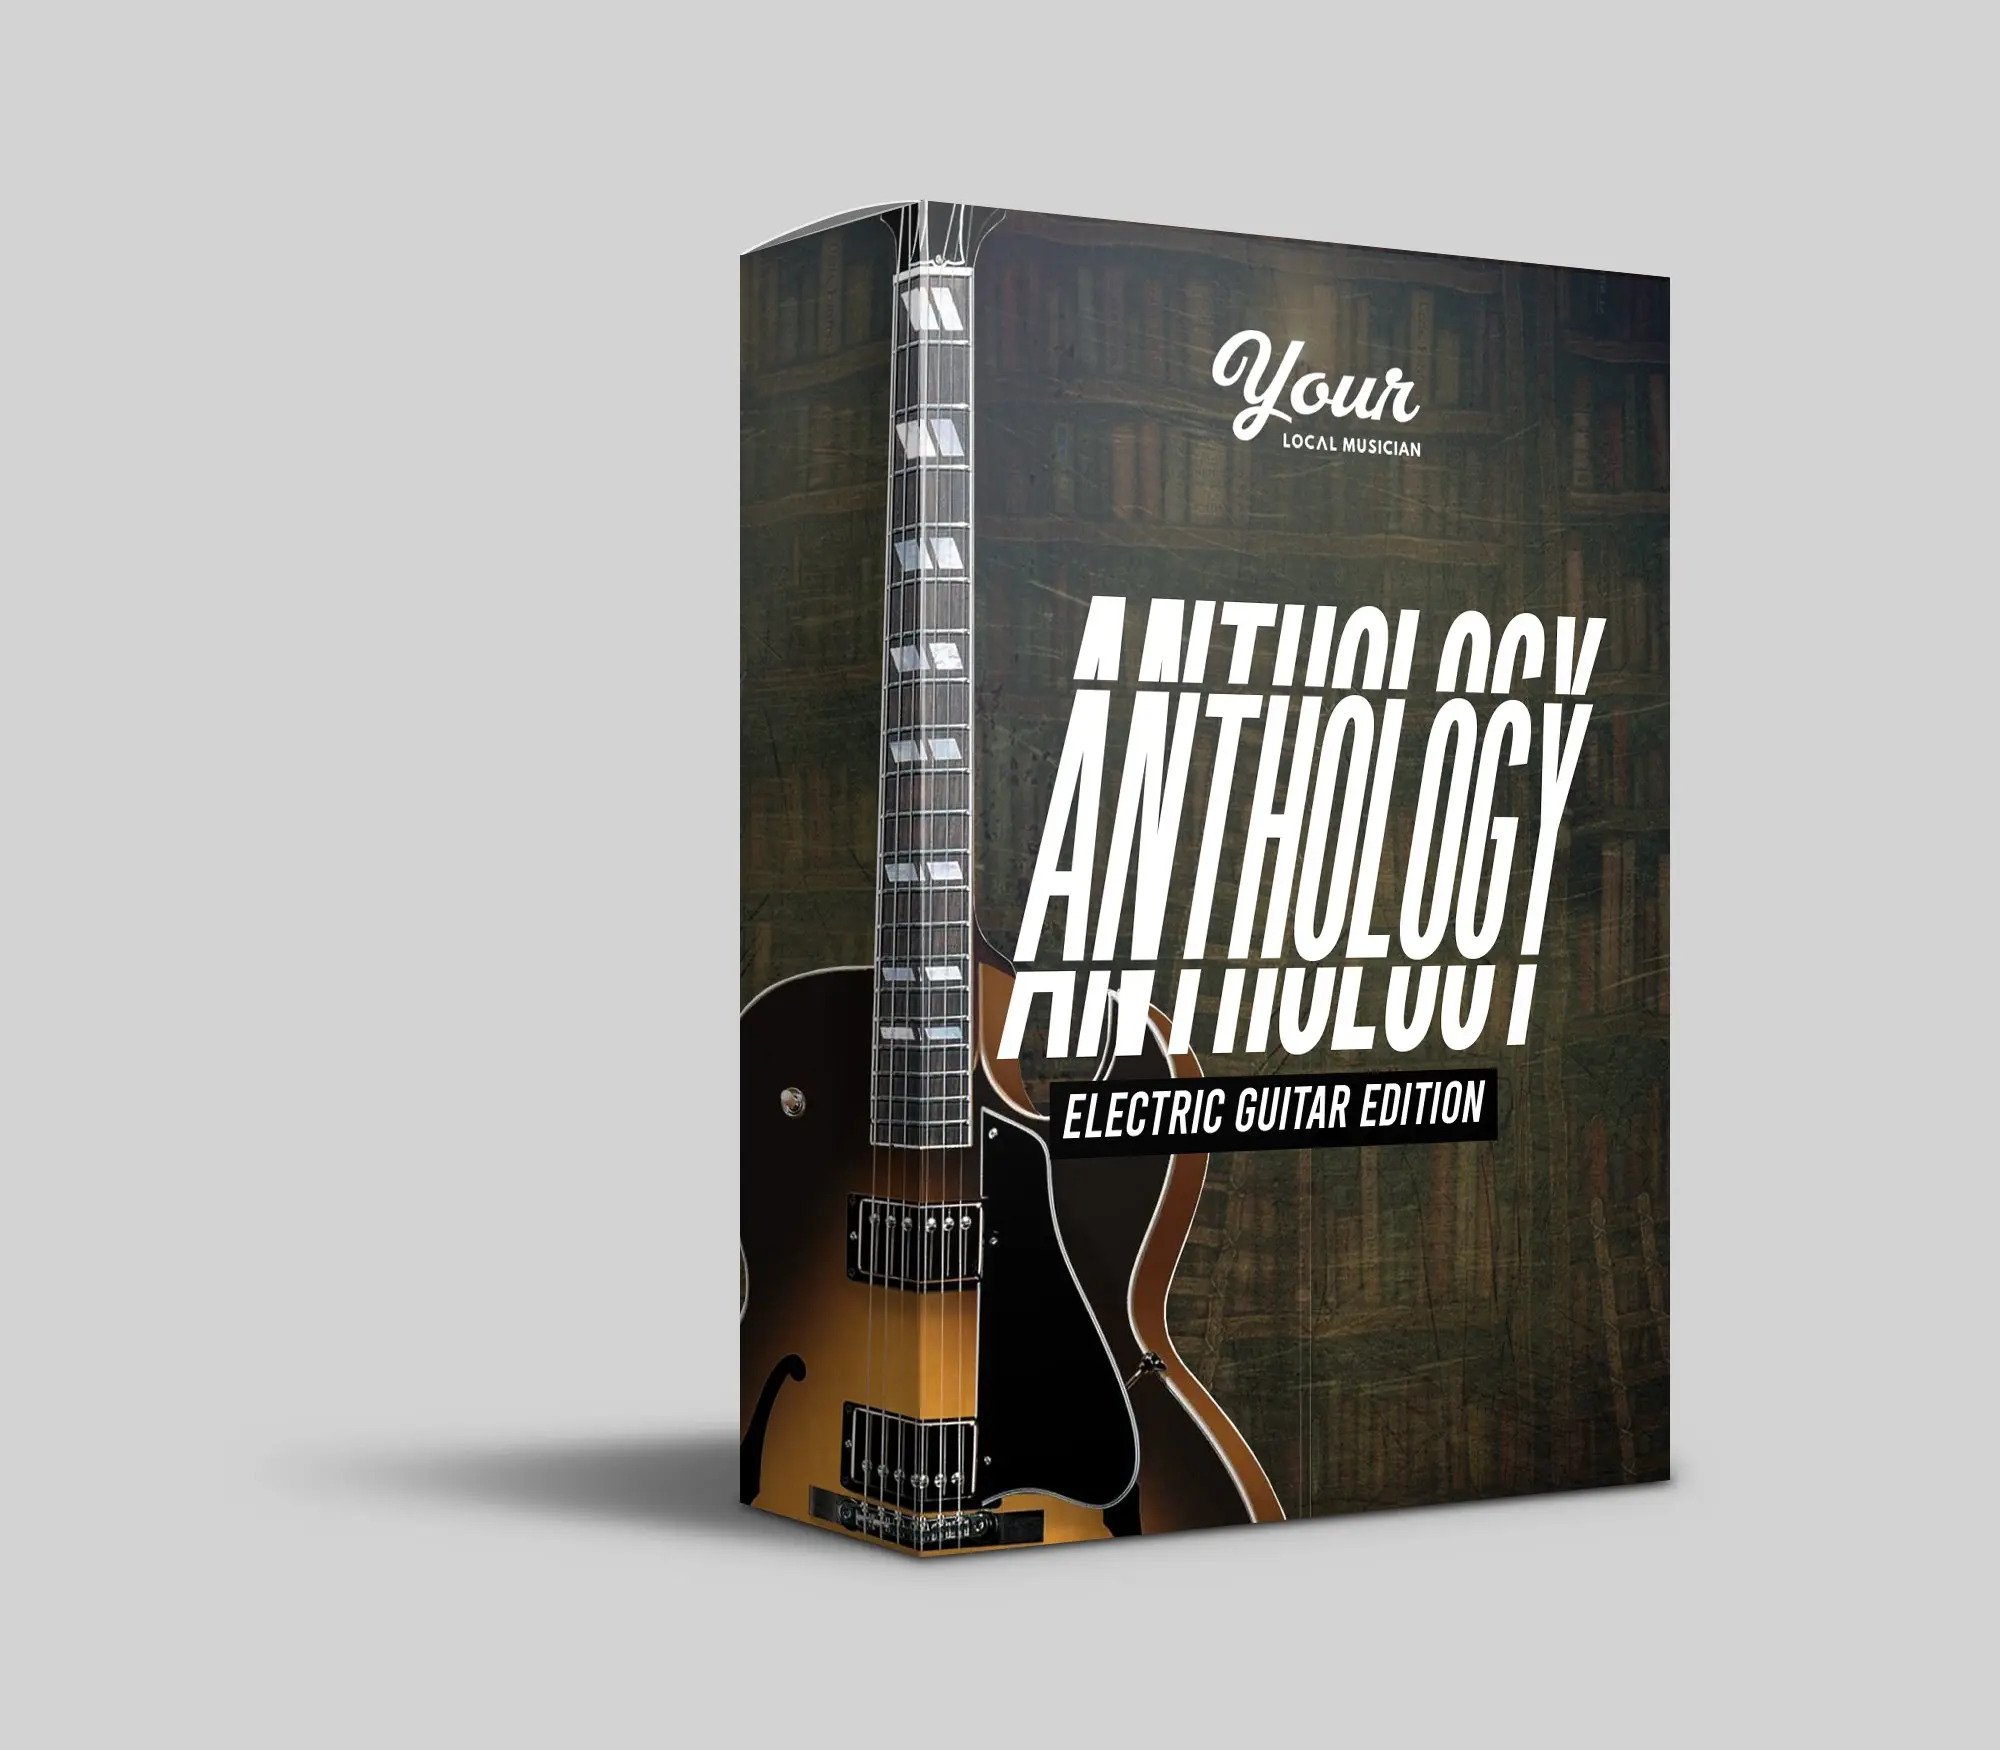 Anthology ( Electric Guitar Edition)